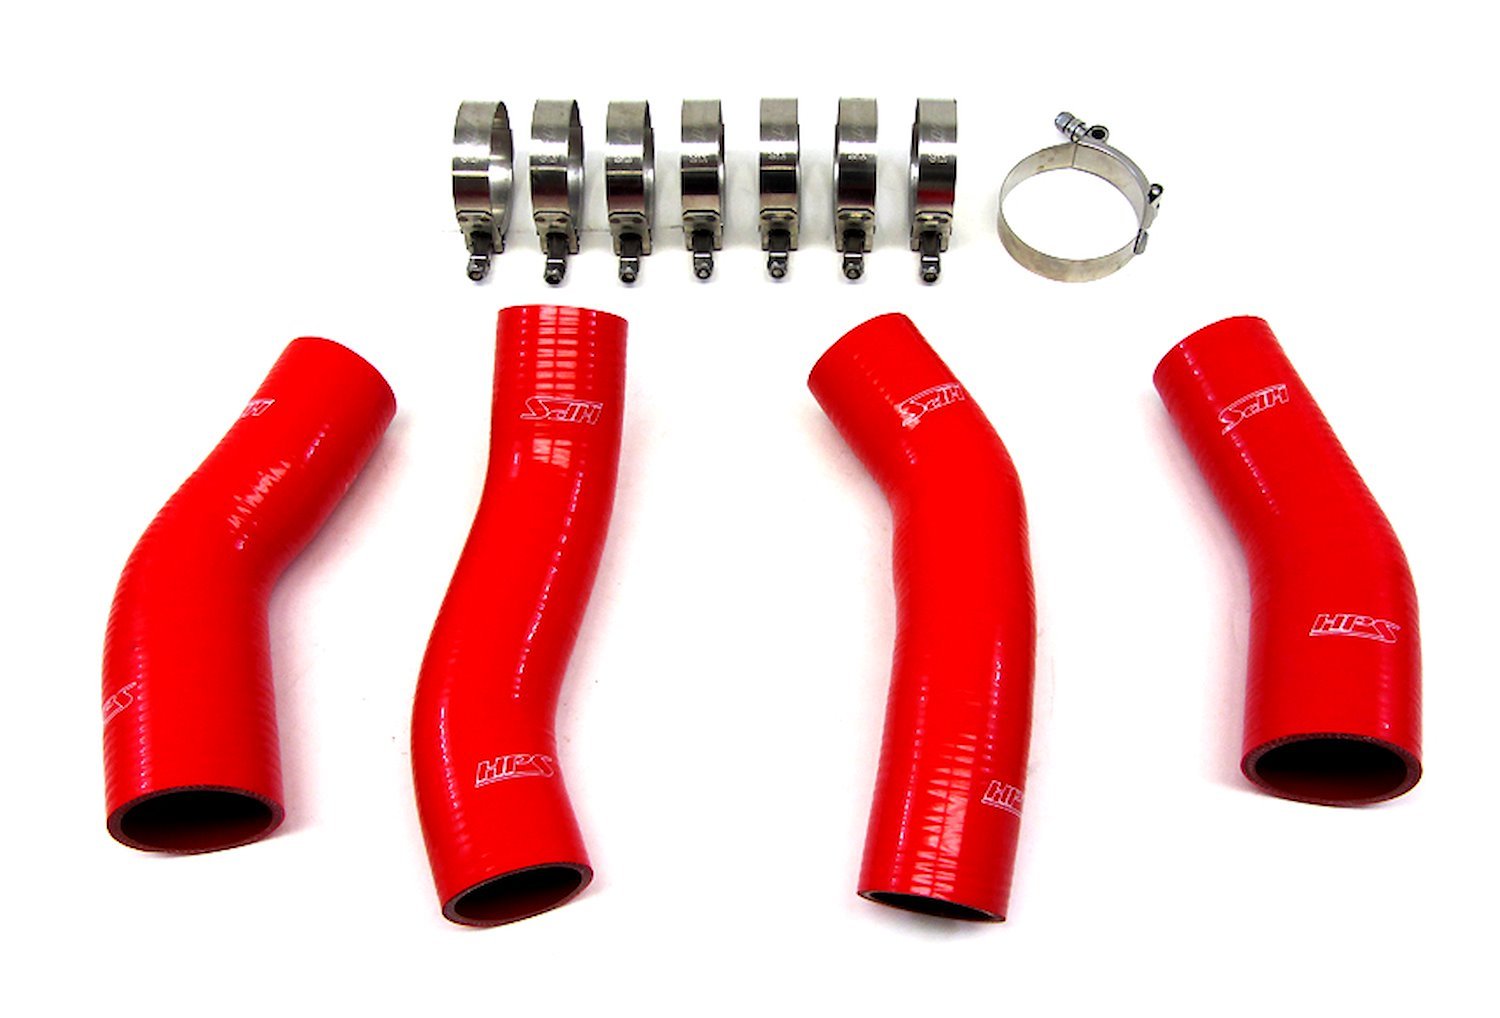 57-1047-RED Intercooler Hose Kit, High-Temp 4-Ply Reinforced Silicone, Replace OEM Rubber Intercooler Turbo Boots